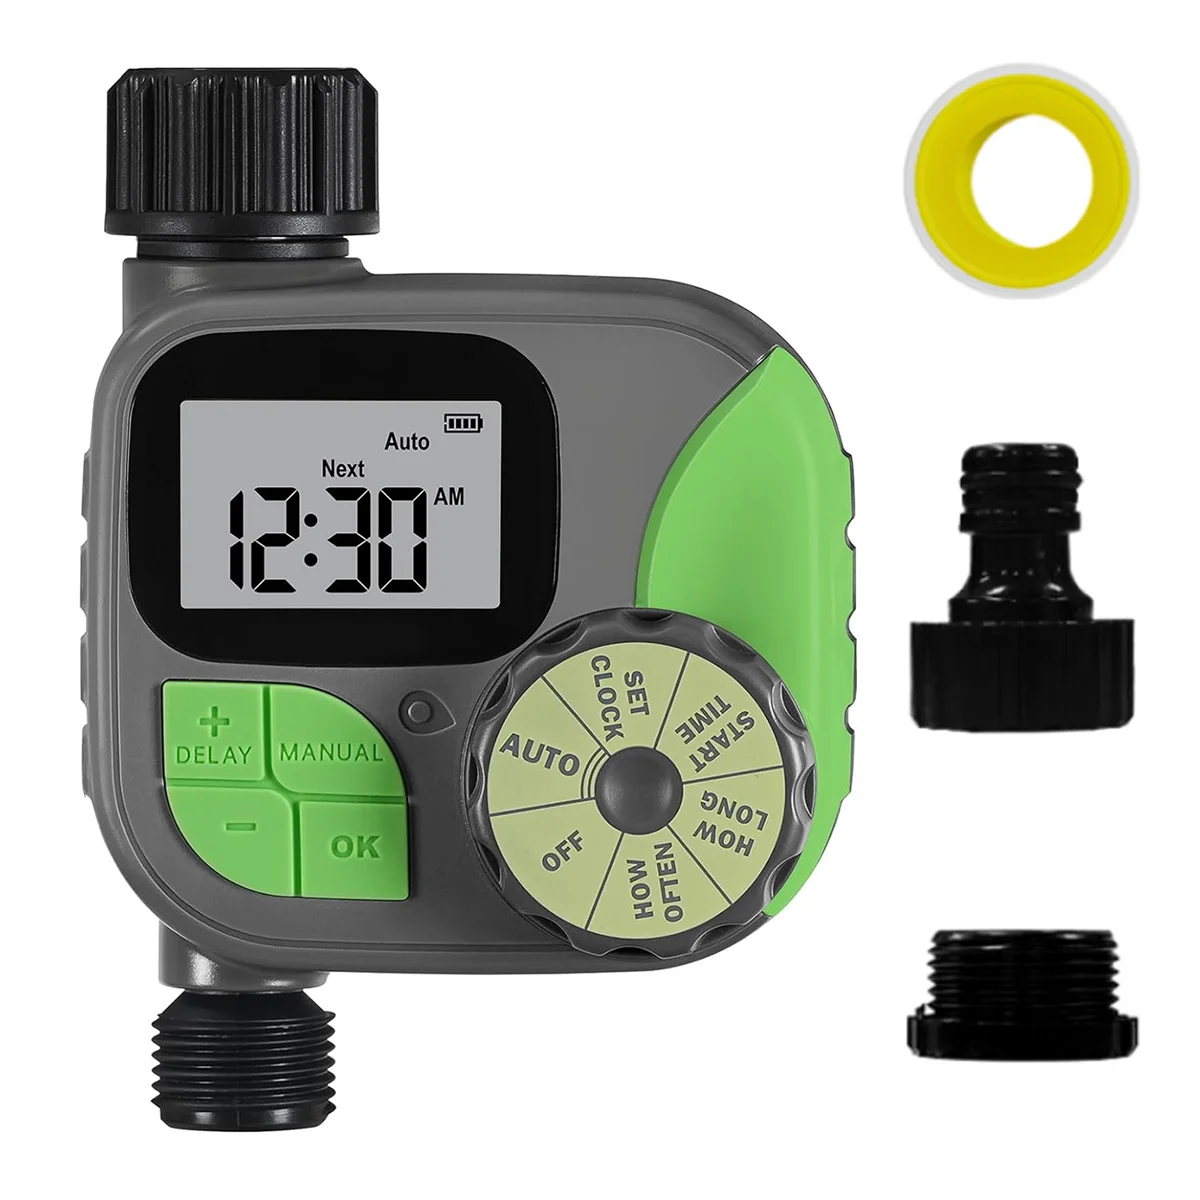 

Sprinkler Timer Outdoor, Programmable Water Timer for Garden Hose, Waterproof Hose Timer with Rain Delay/Manual A